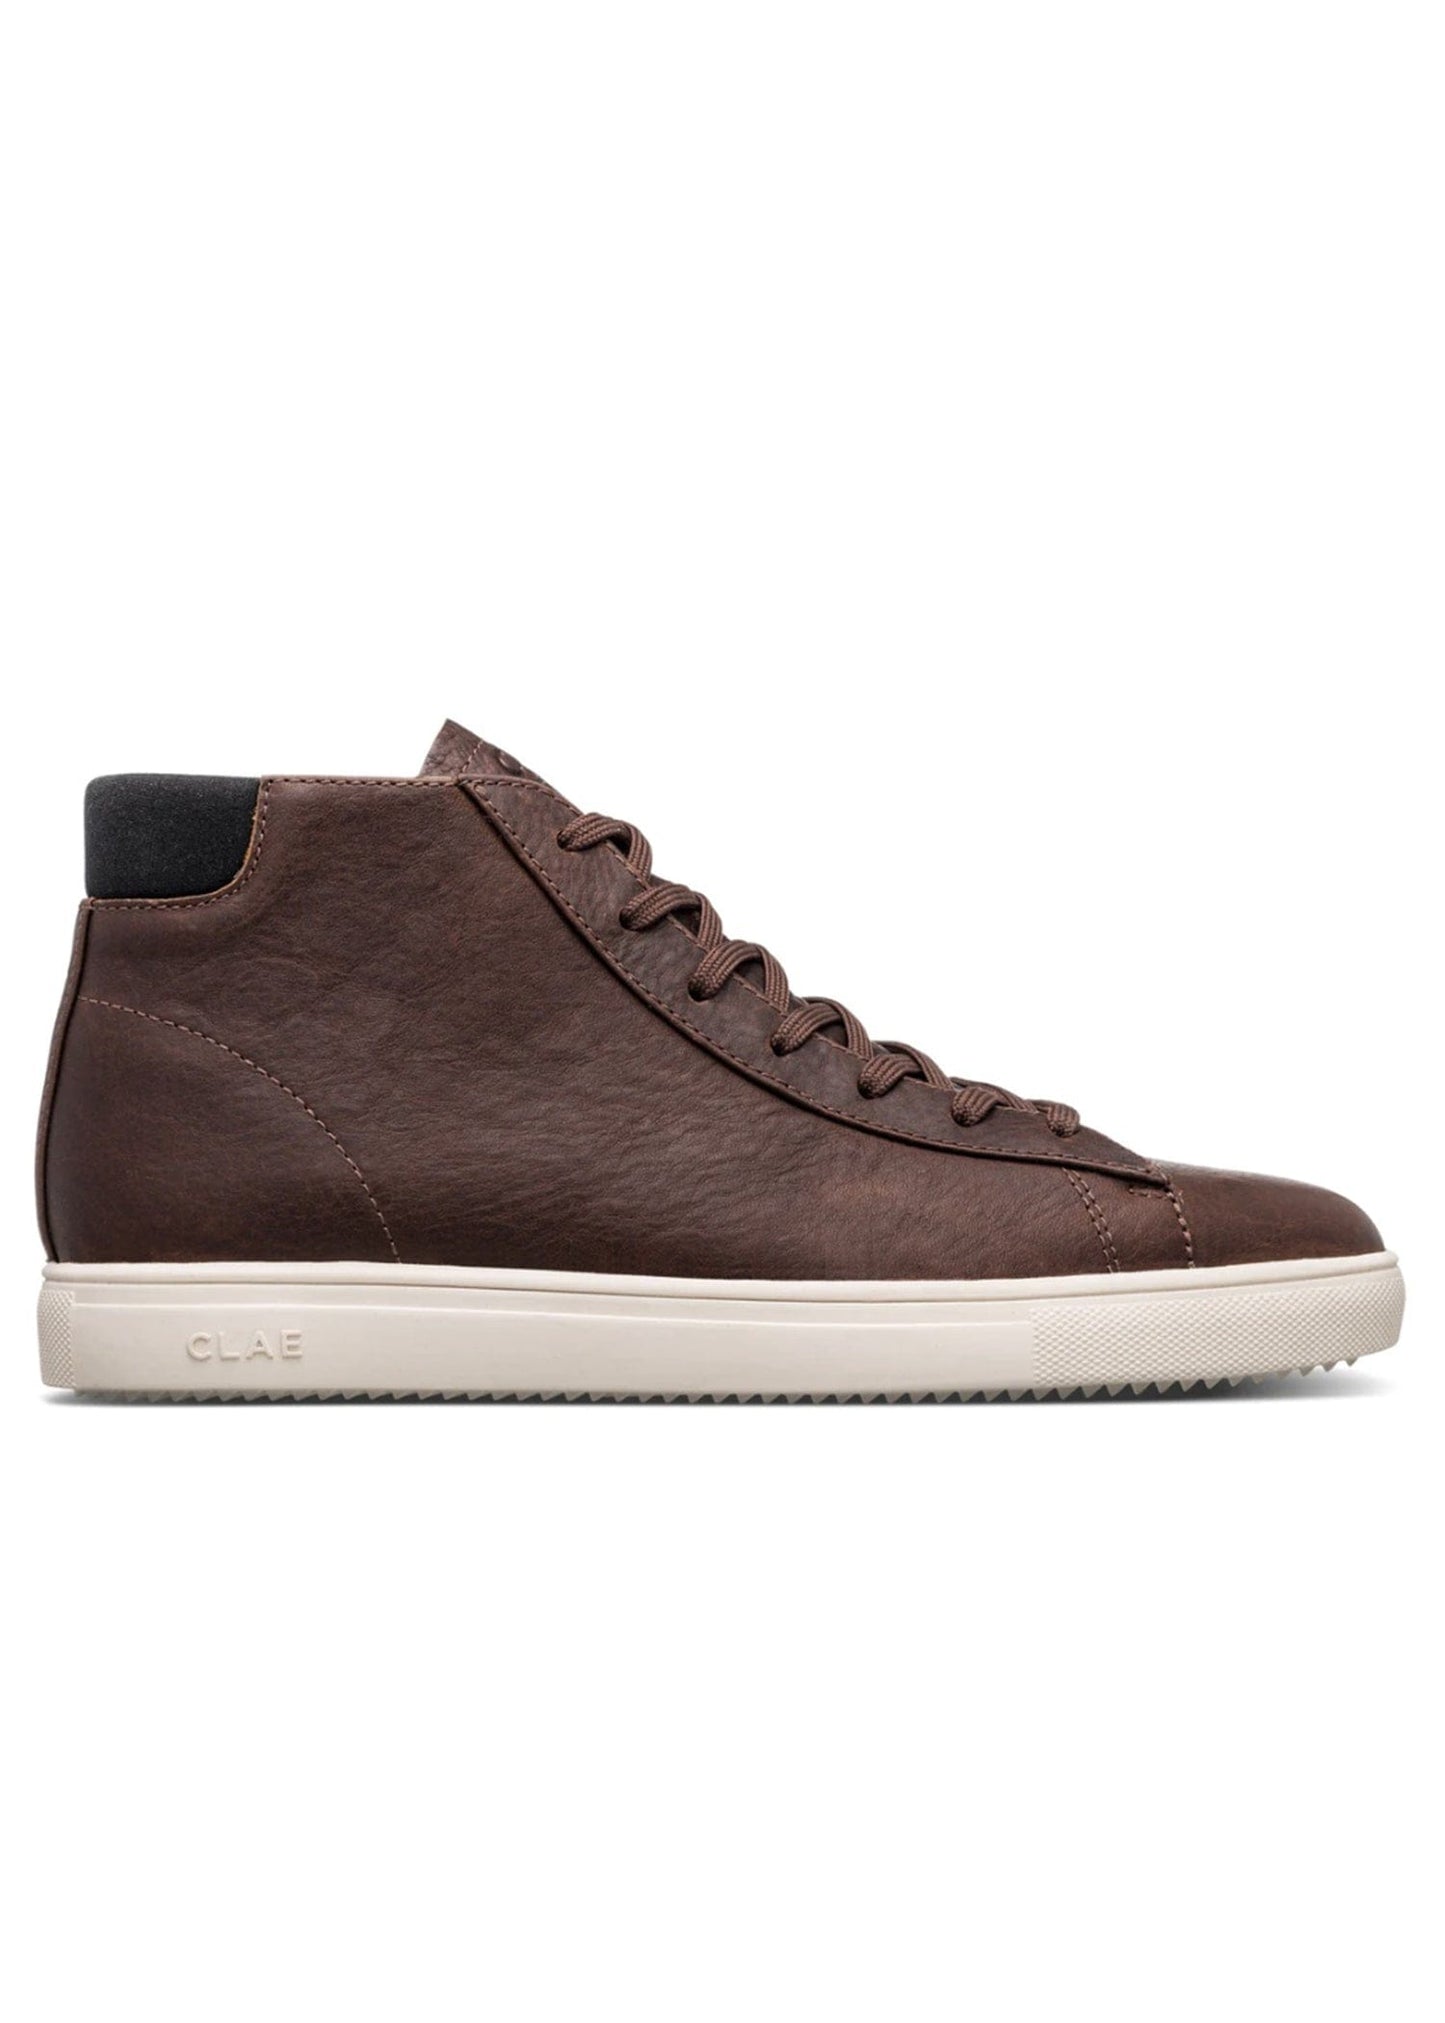 Clae Chaussures 40 / Cocoa leather Chaussures CLAE - Baskets Bradley Mid Coco leather